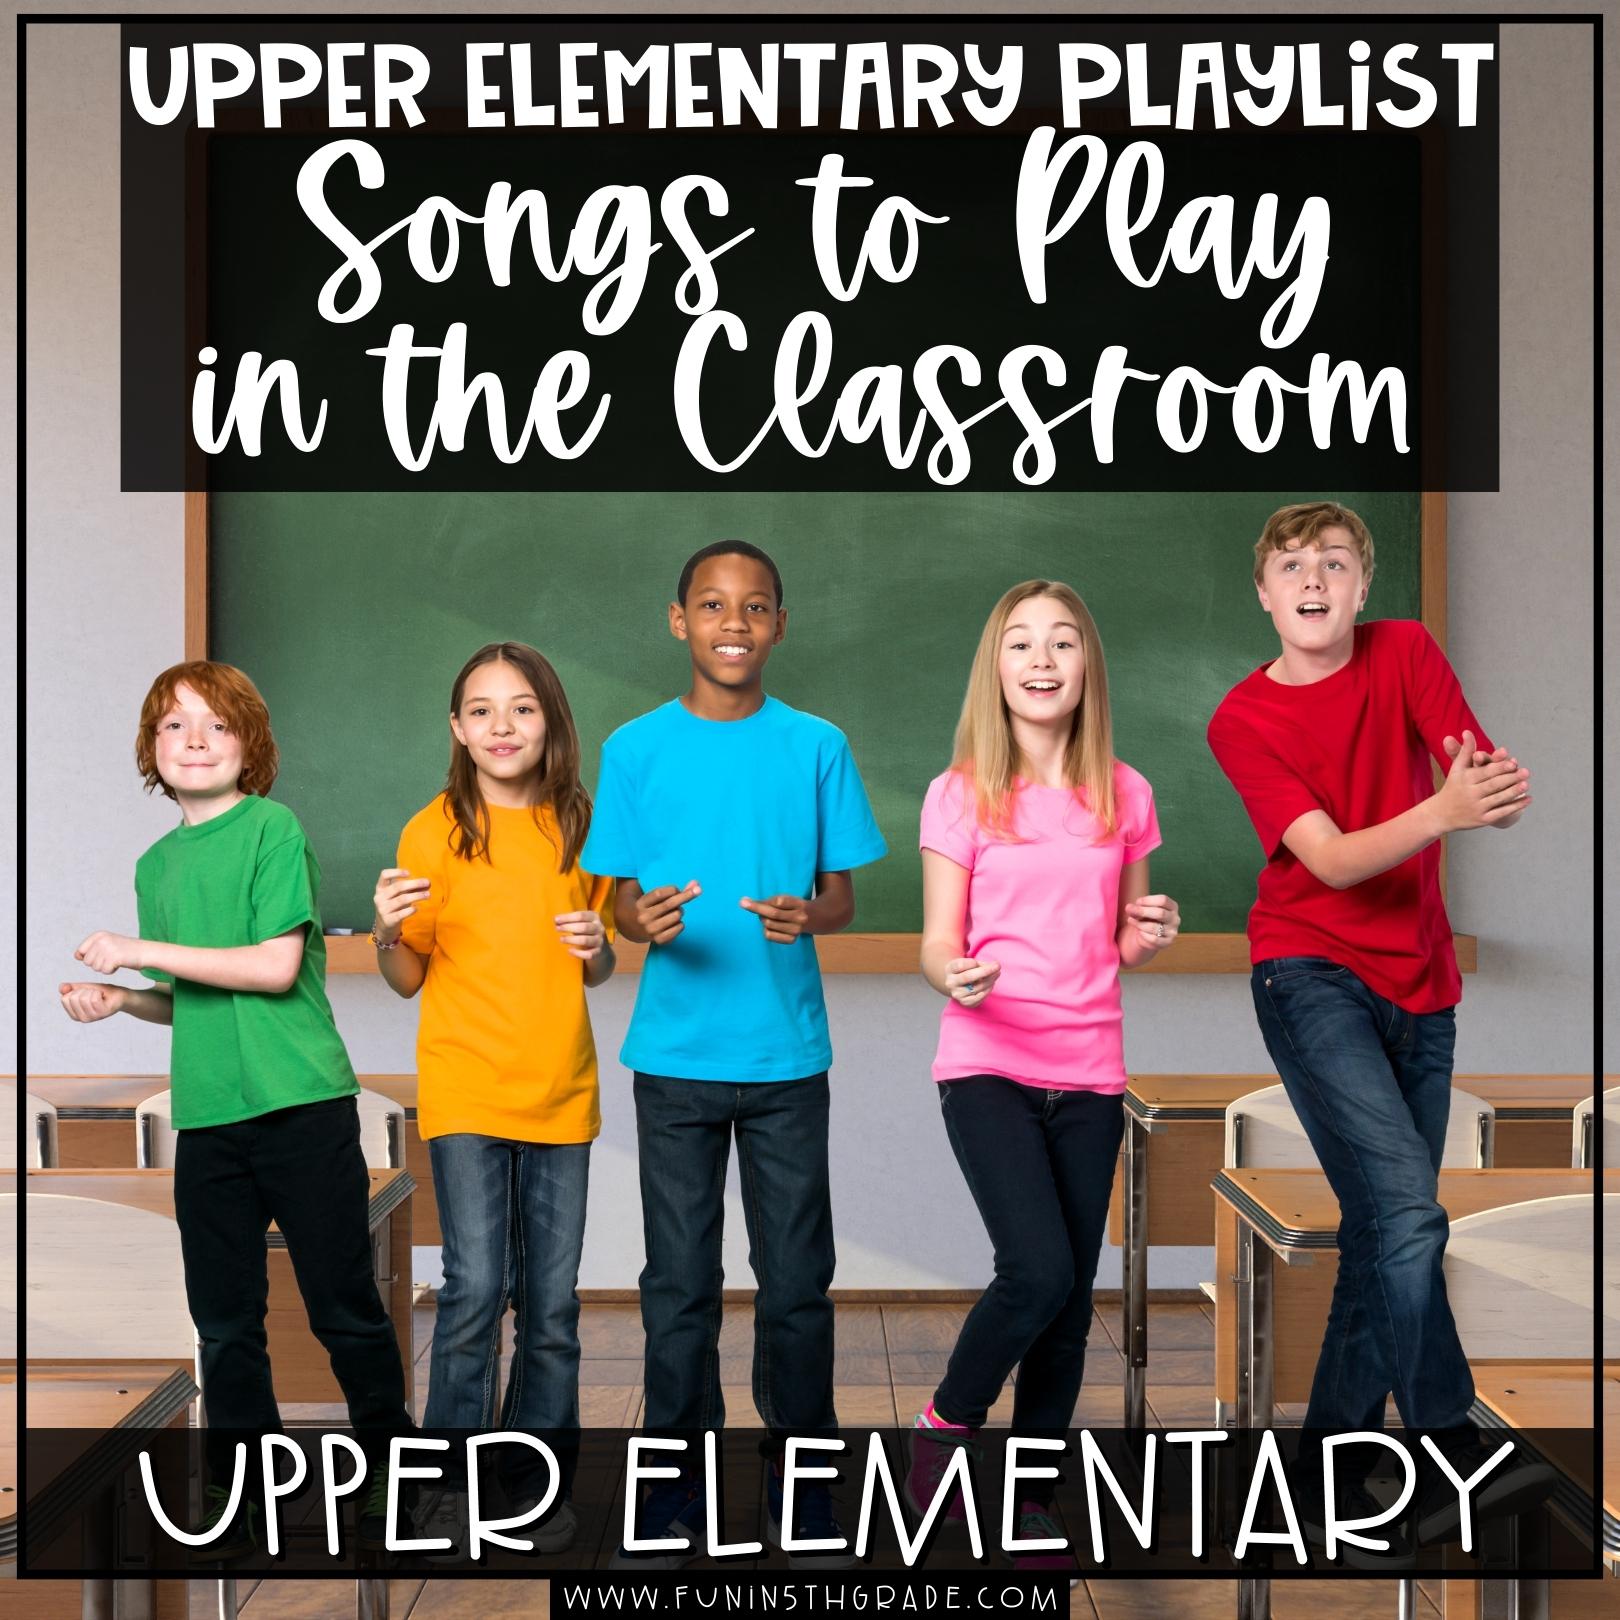 Songs to Play in the Classroom (Blog Post)